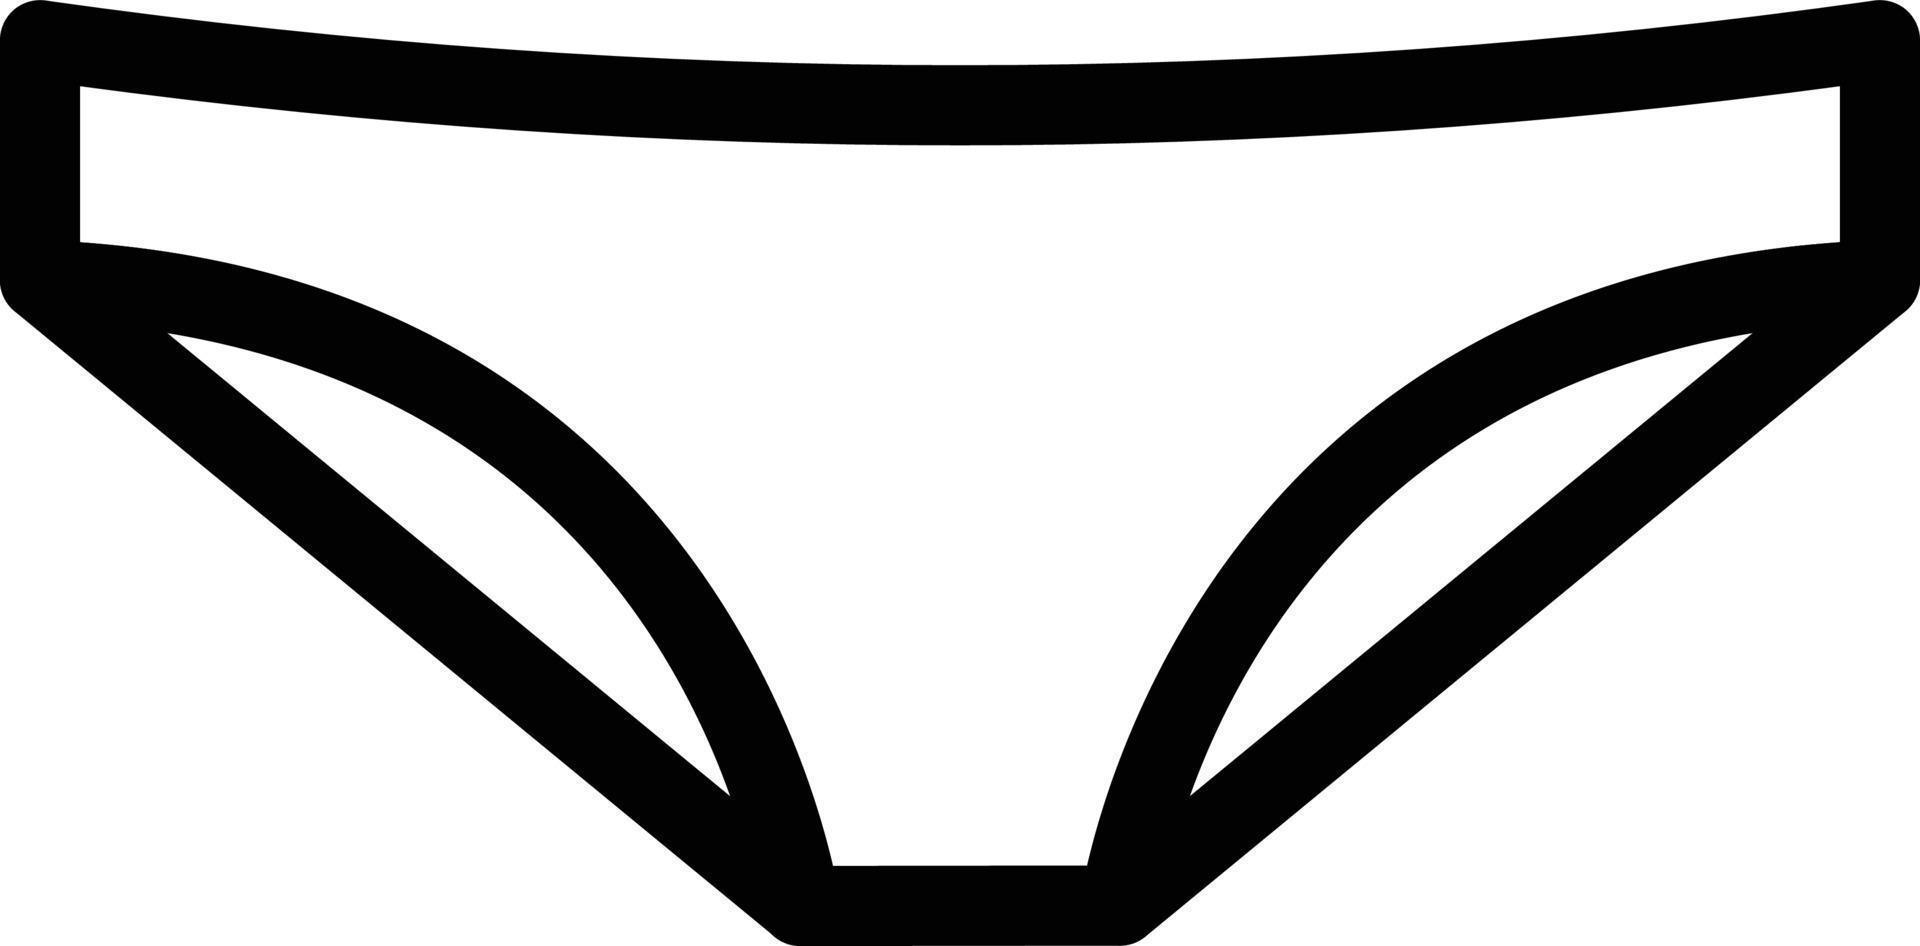 underwear vector illustration on a background.Premium quality symbols.vector icons for concept and graphic design.